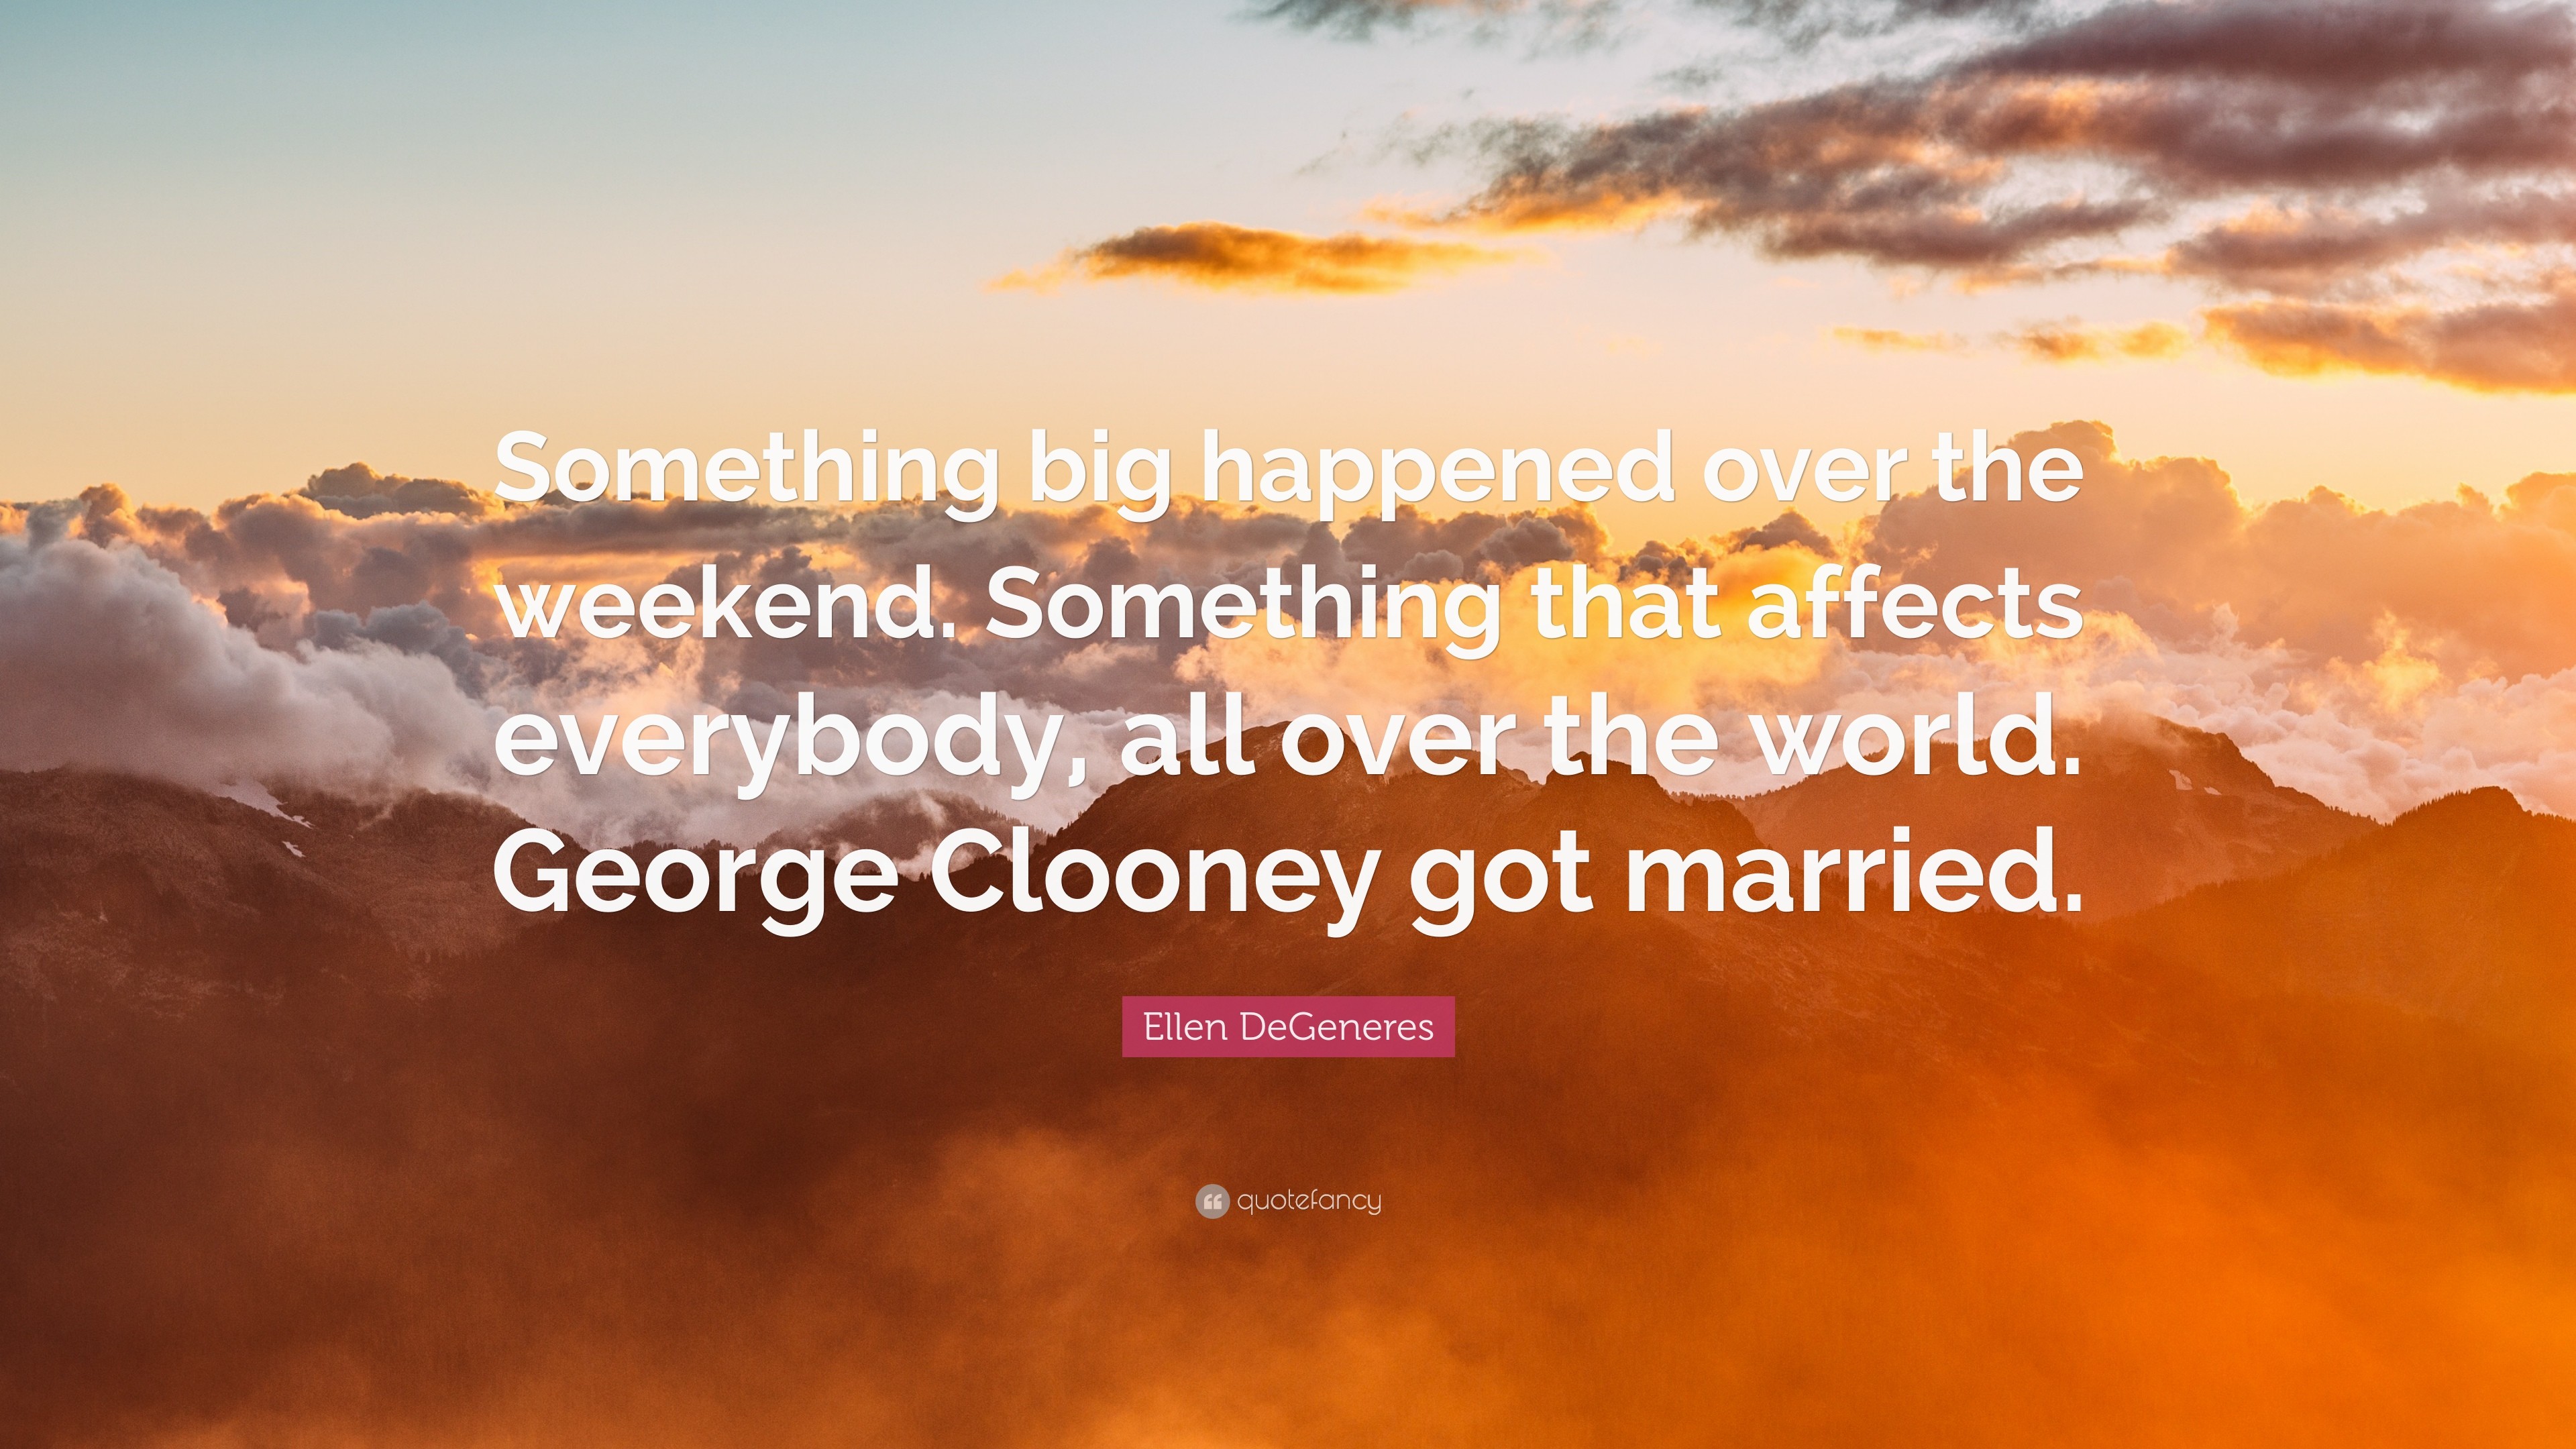 3840x2160 Ellen DeGeneres Quote: “Something big happened over the weekend. Something  that affects everybody